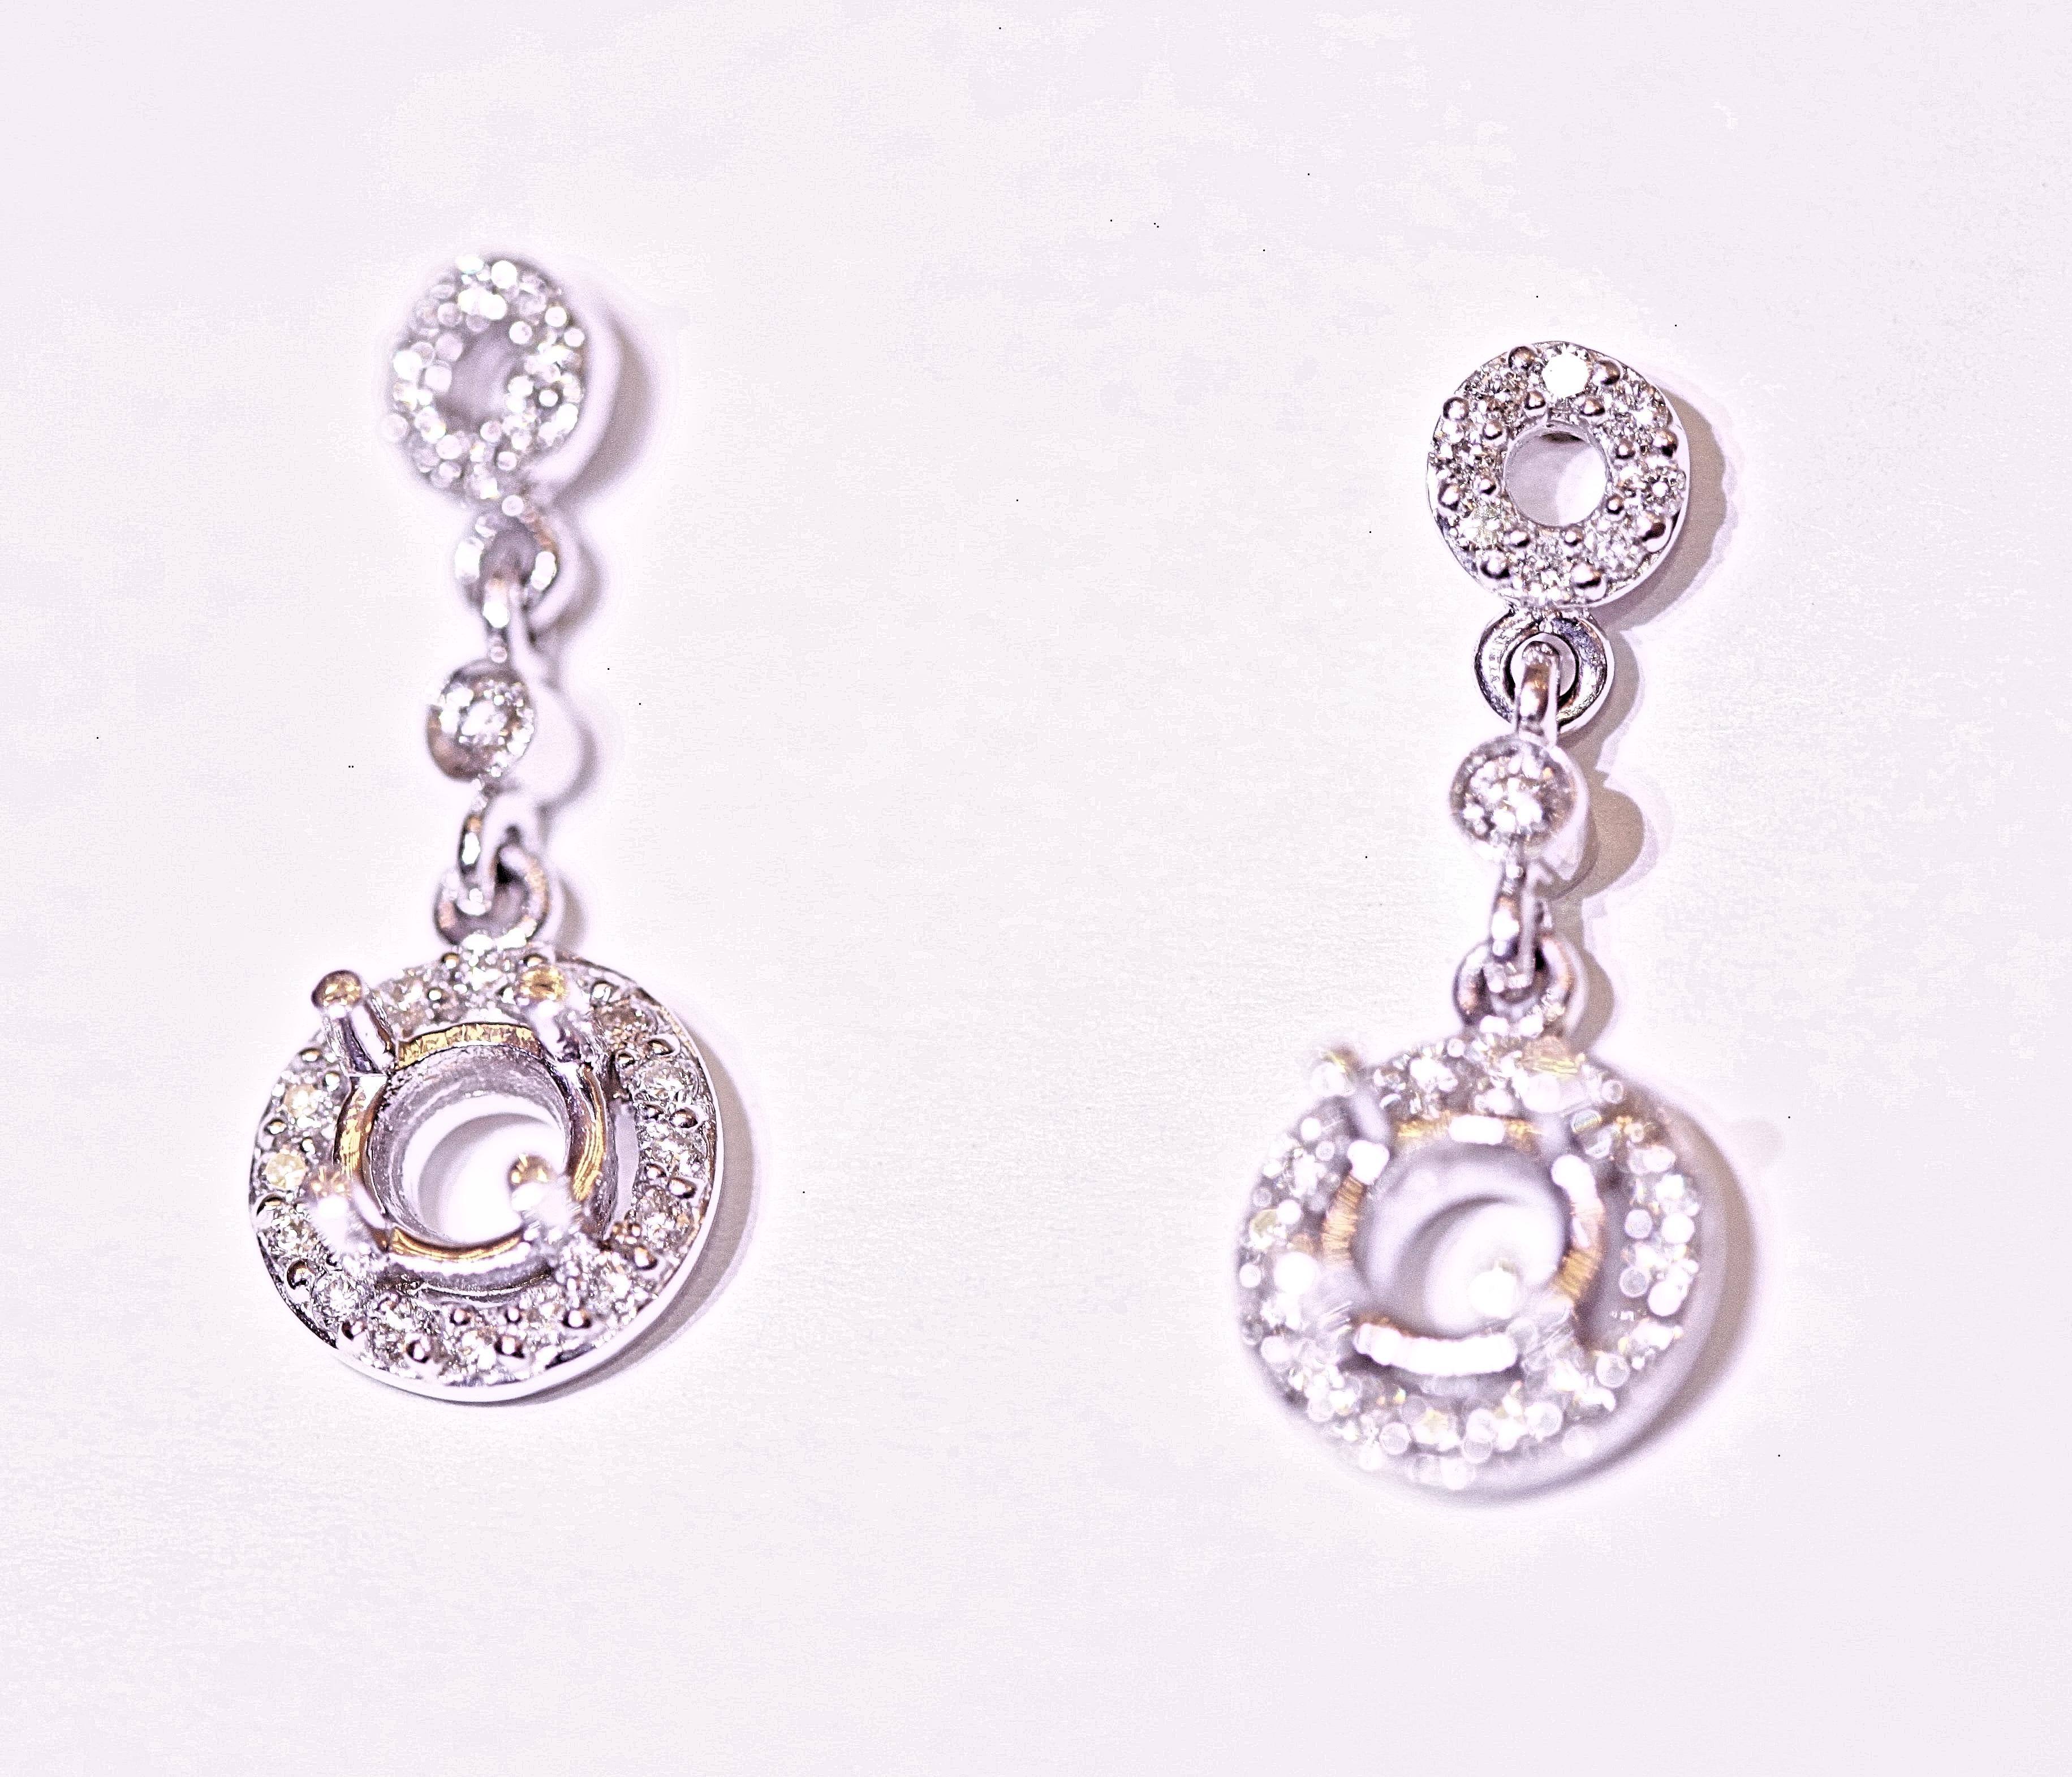 Beautiful diamond drop earrings with a 4 mm center that needs a diamond, sapphire, pearl or any color you want to use to enhance the earrings.  The diamonds are round brilliant cut with .24 carat total weight.  The earrings are 7/8 of an inch long